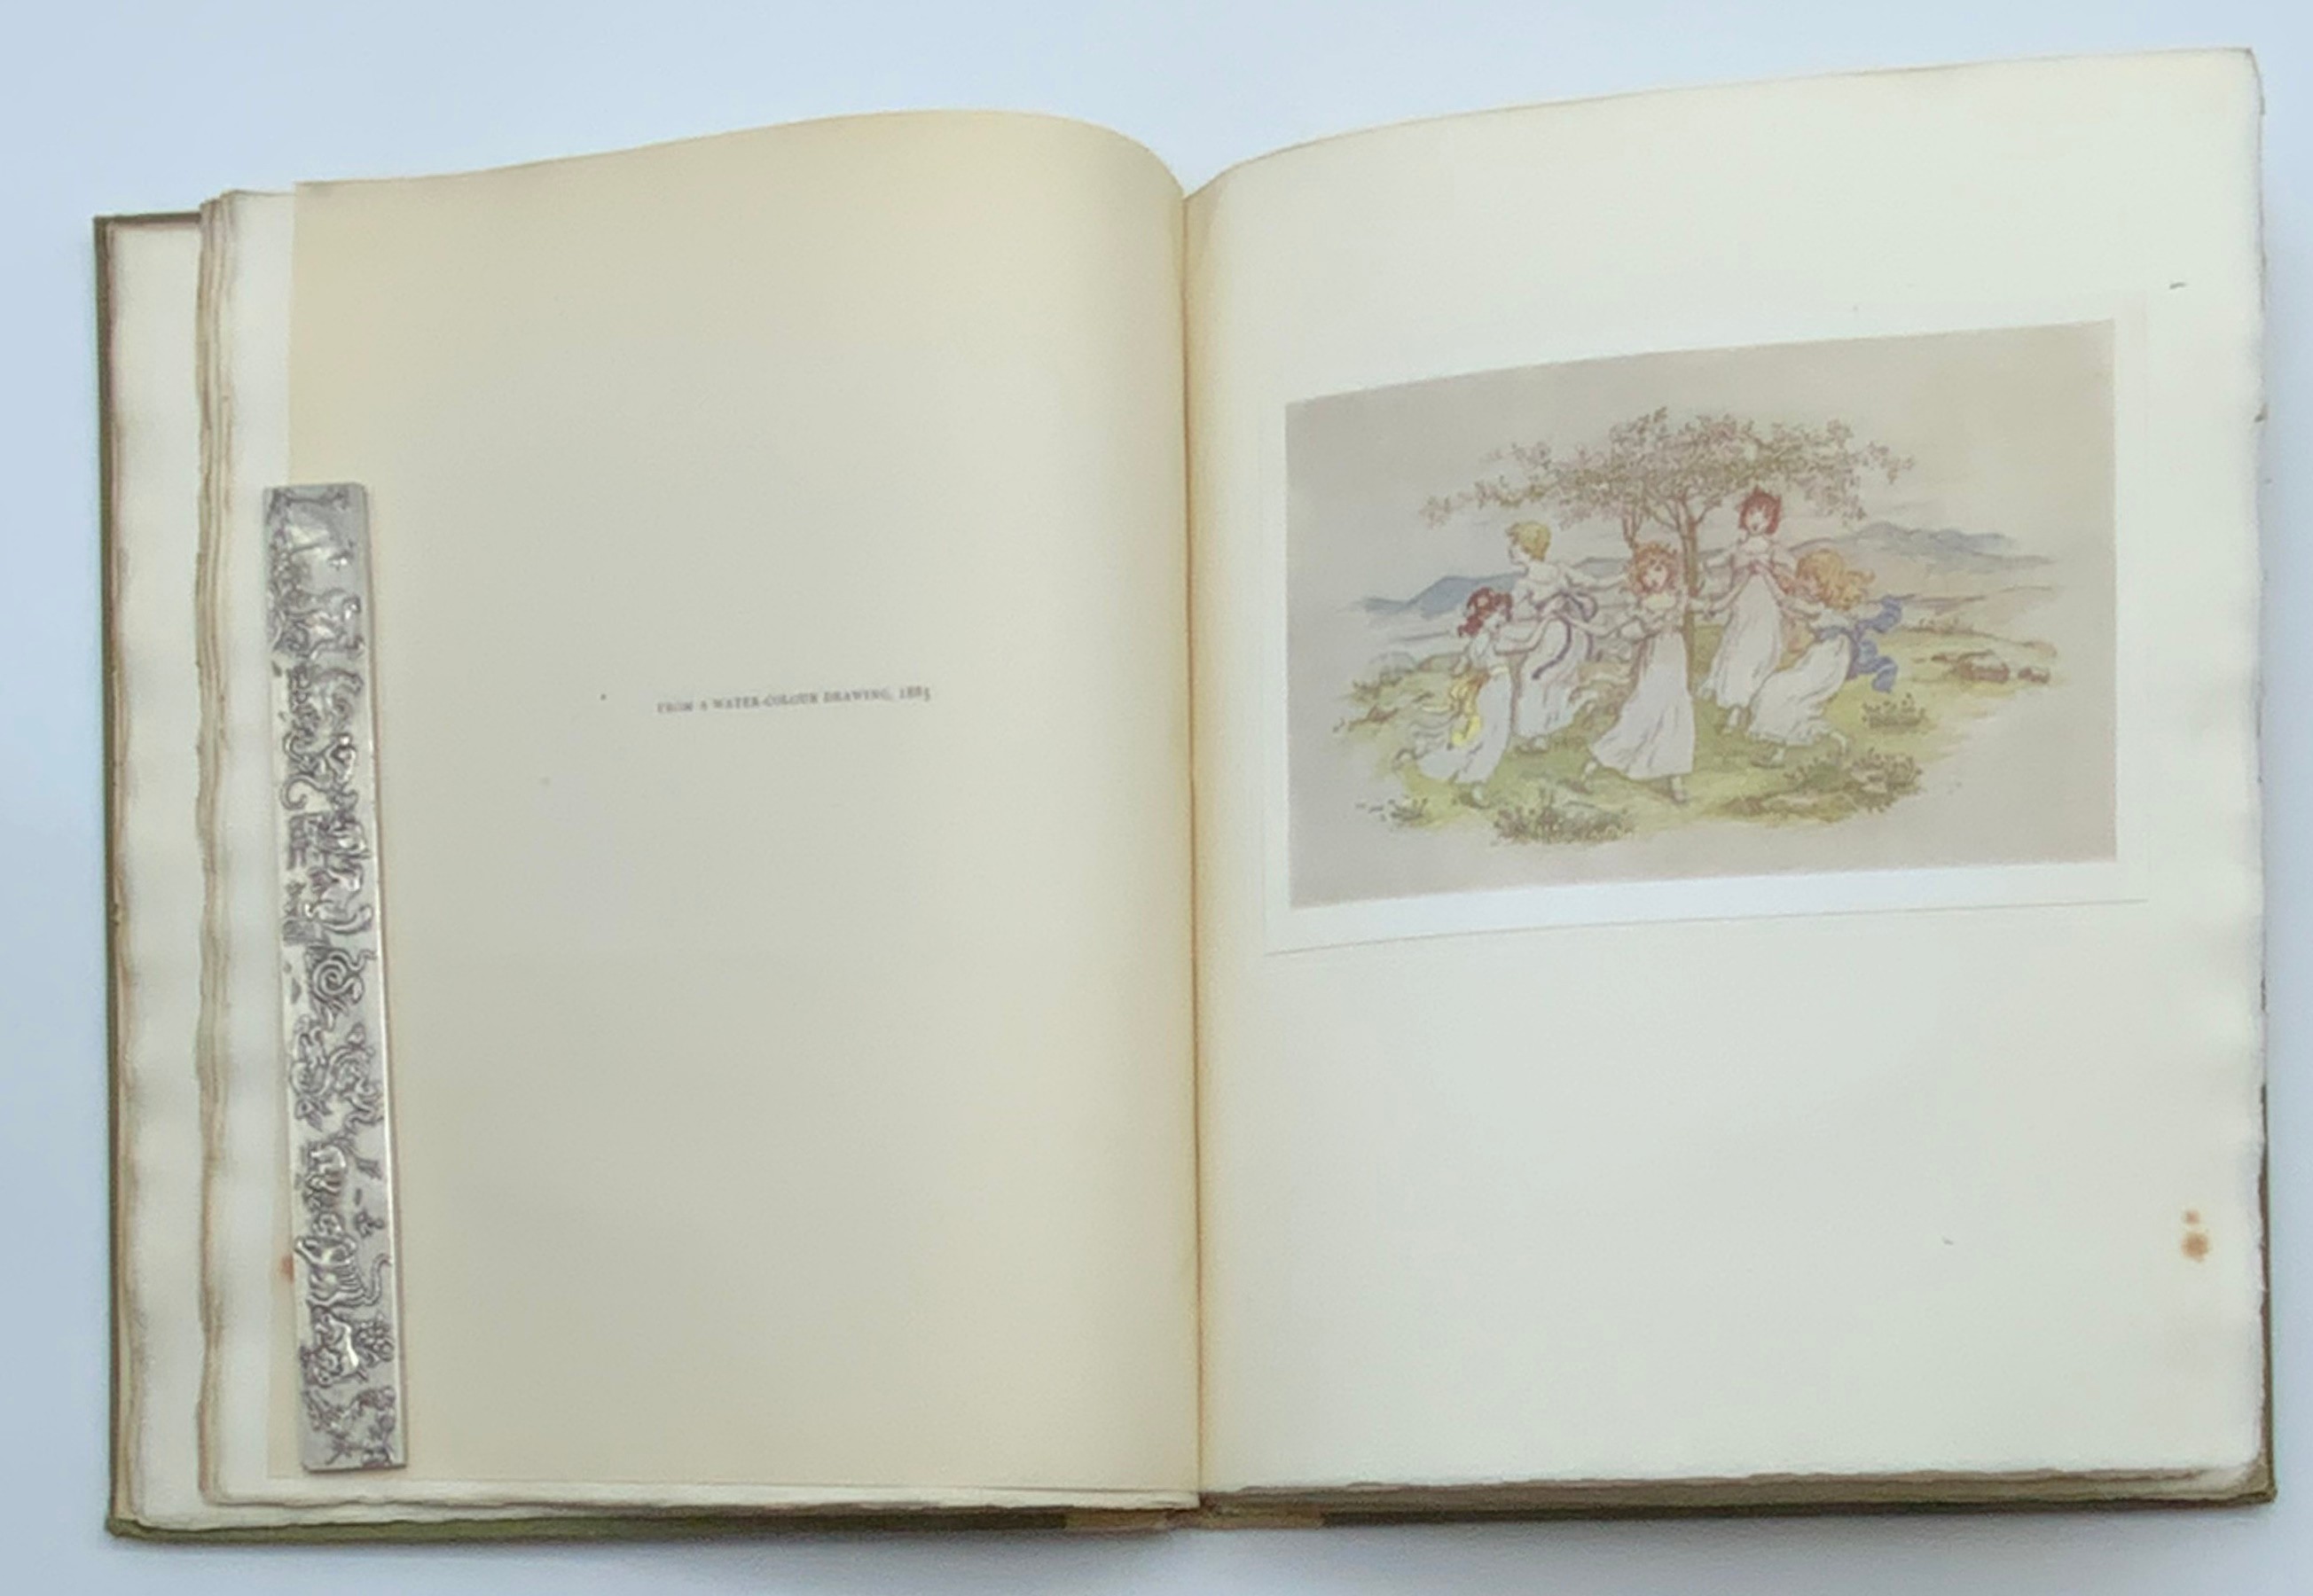 1921 KATE GREENAWAY PICTURES FROM ORIGINALS PRESENTED BY HER TO JOHN RUSKIN - Image 8 of 9